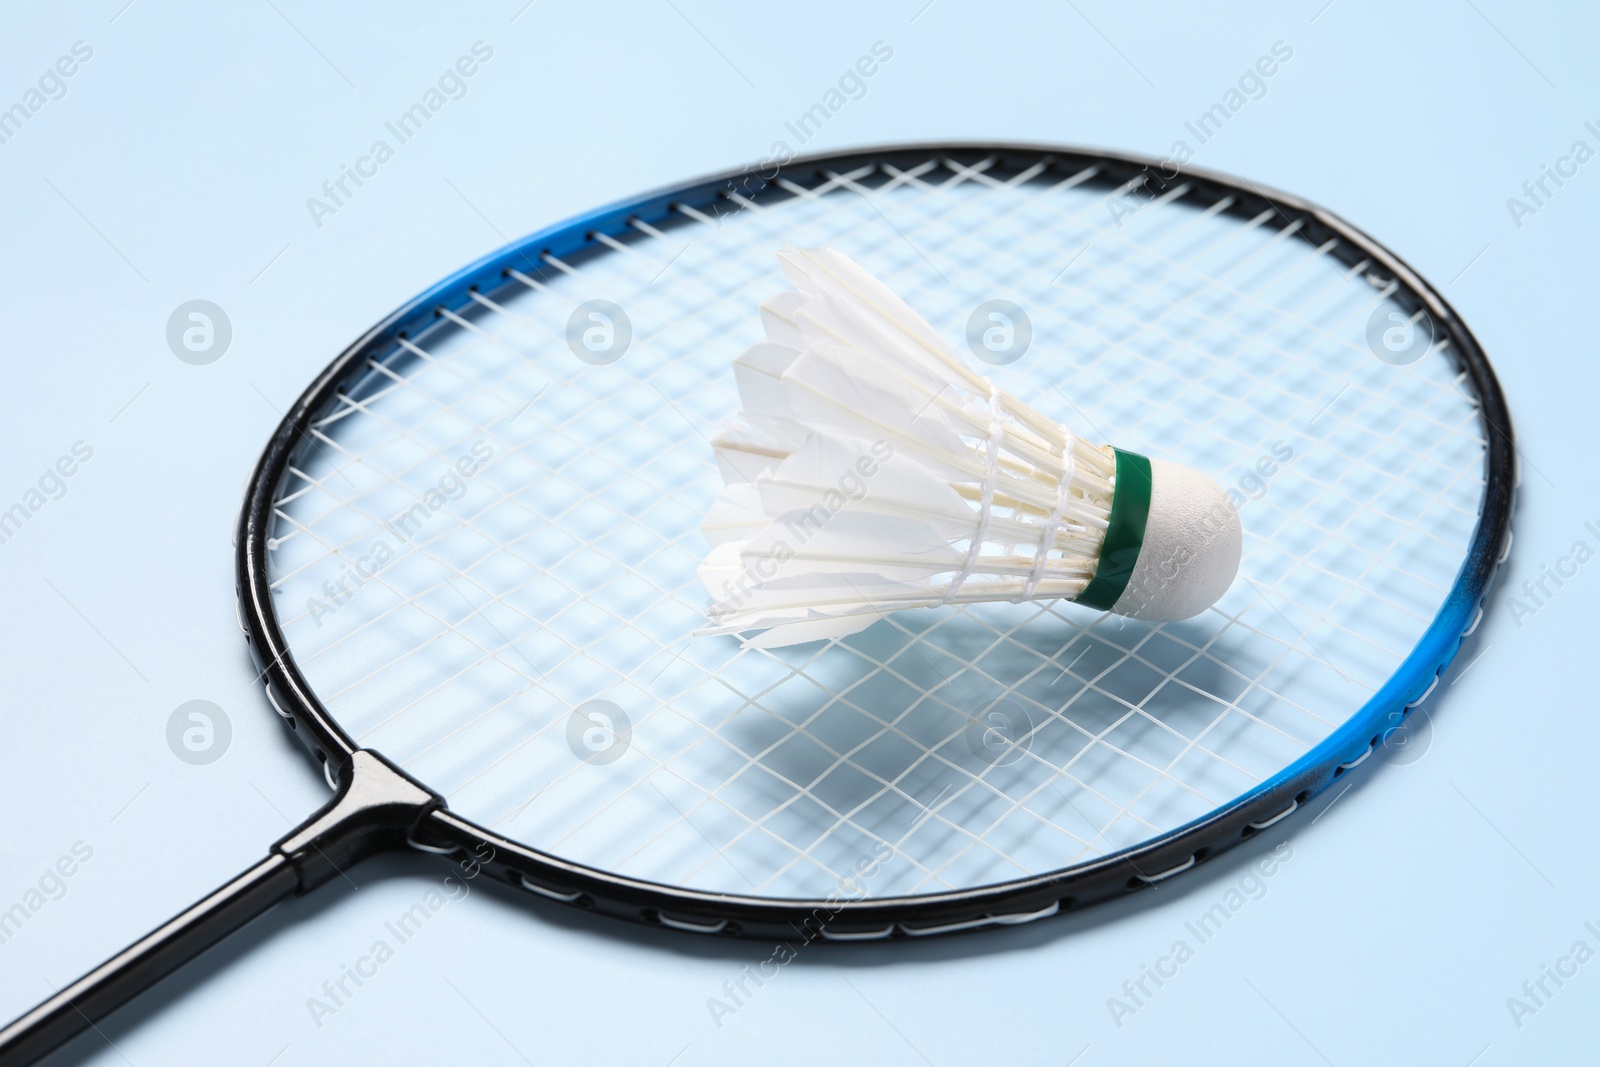 Photo of Feather badminton shuttlecock and racket on light blue background, closeup